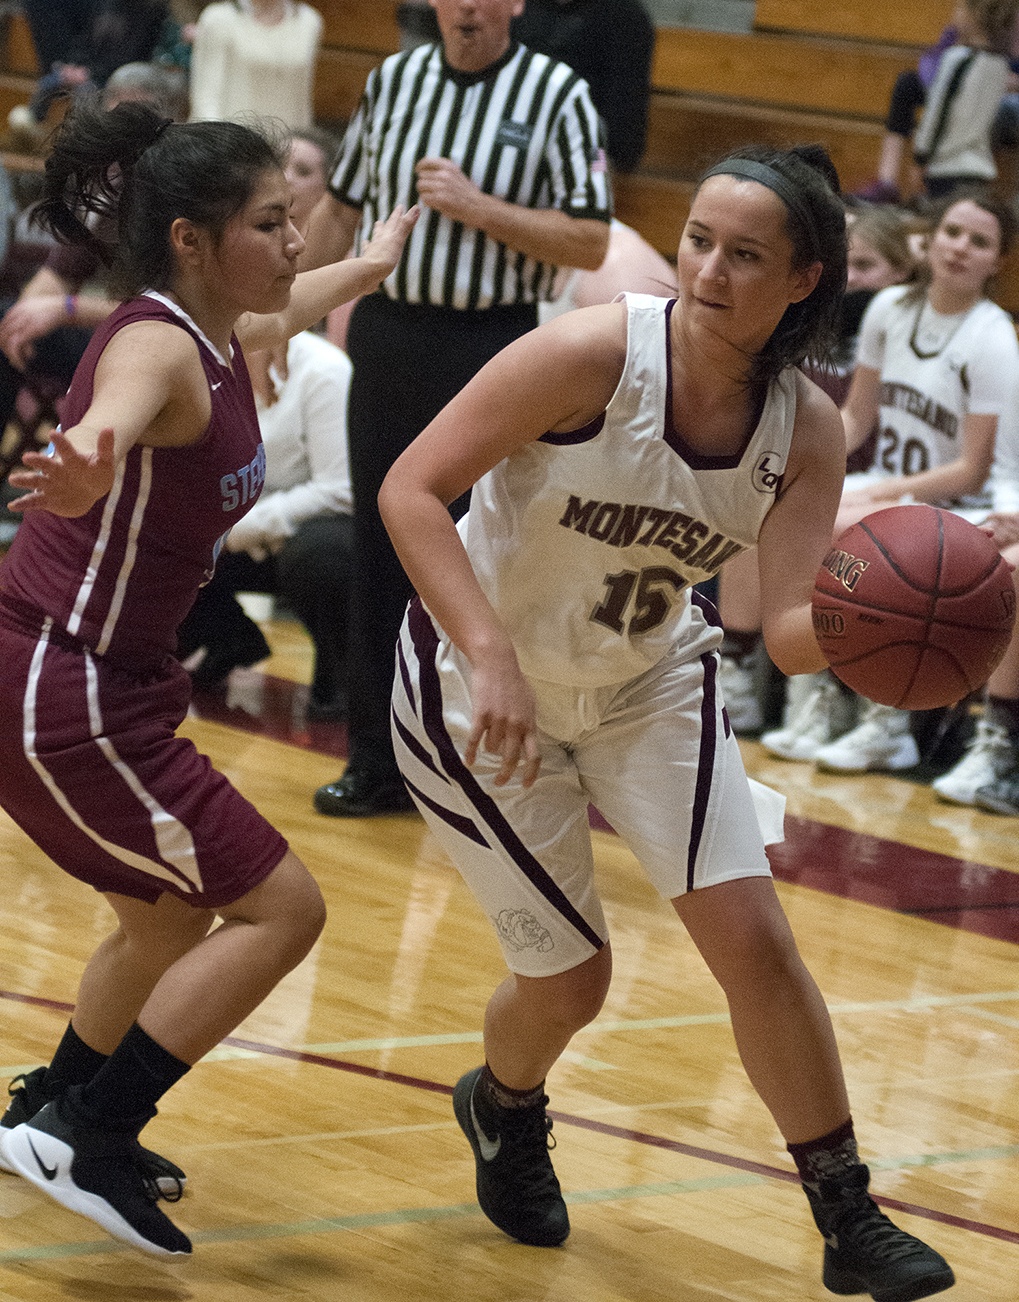 (Brendan Carl | The Daily World) Montesano’s Josie Talley drives around a defender on Friday.